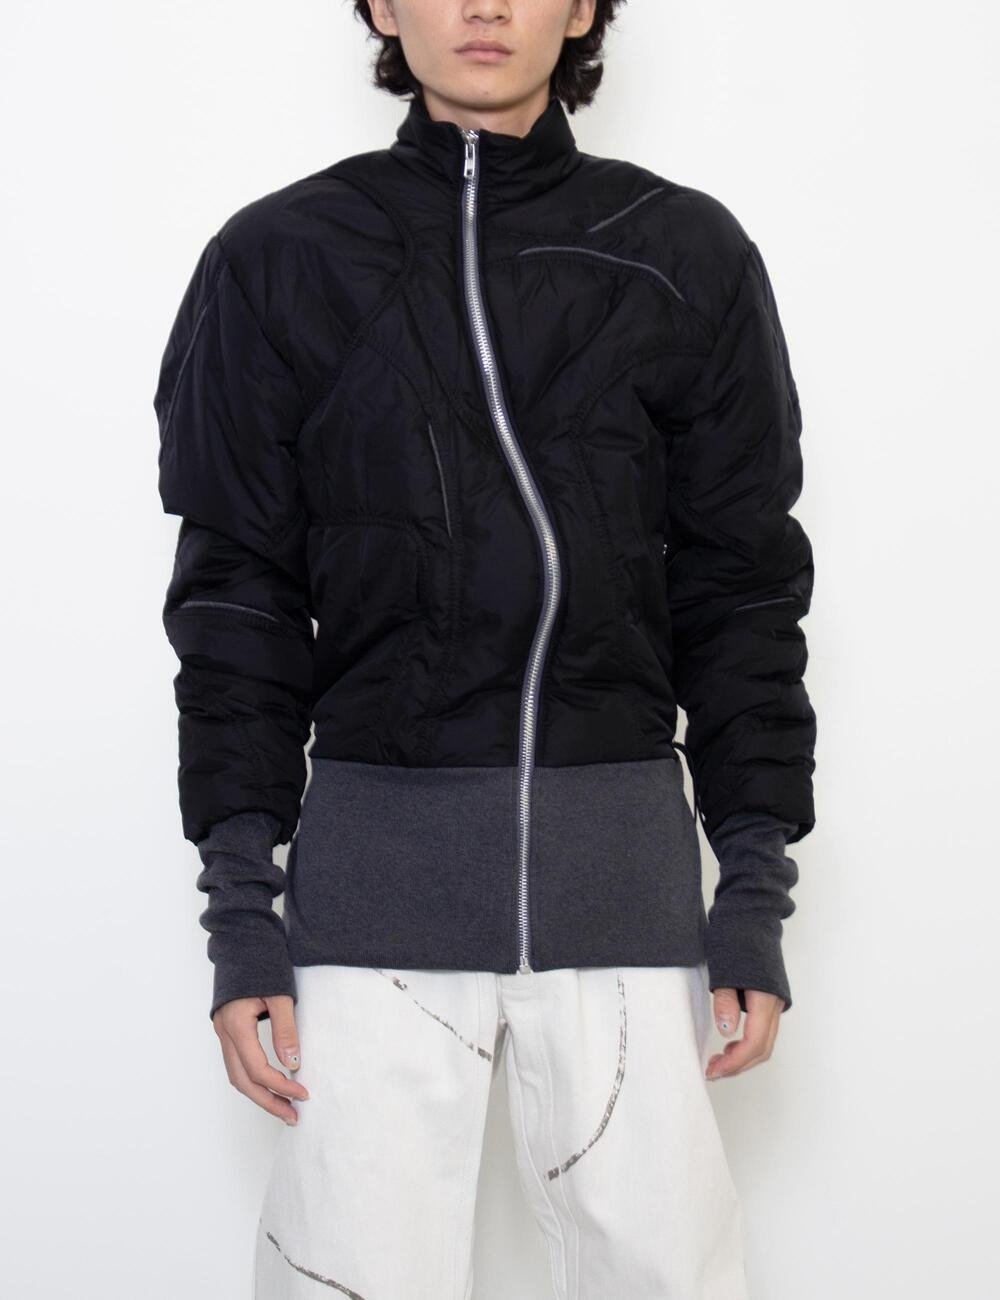 NYLON PUFFER JACKET WITH CONTRAST PIPING AND RIB WAISTBAND AND CUFFS_BLACK